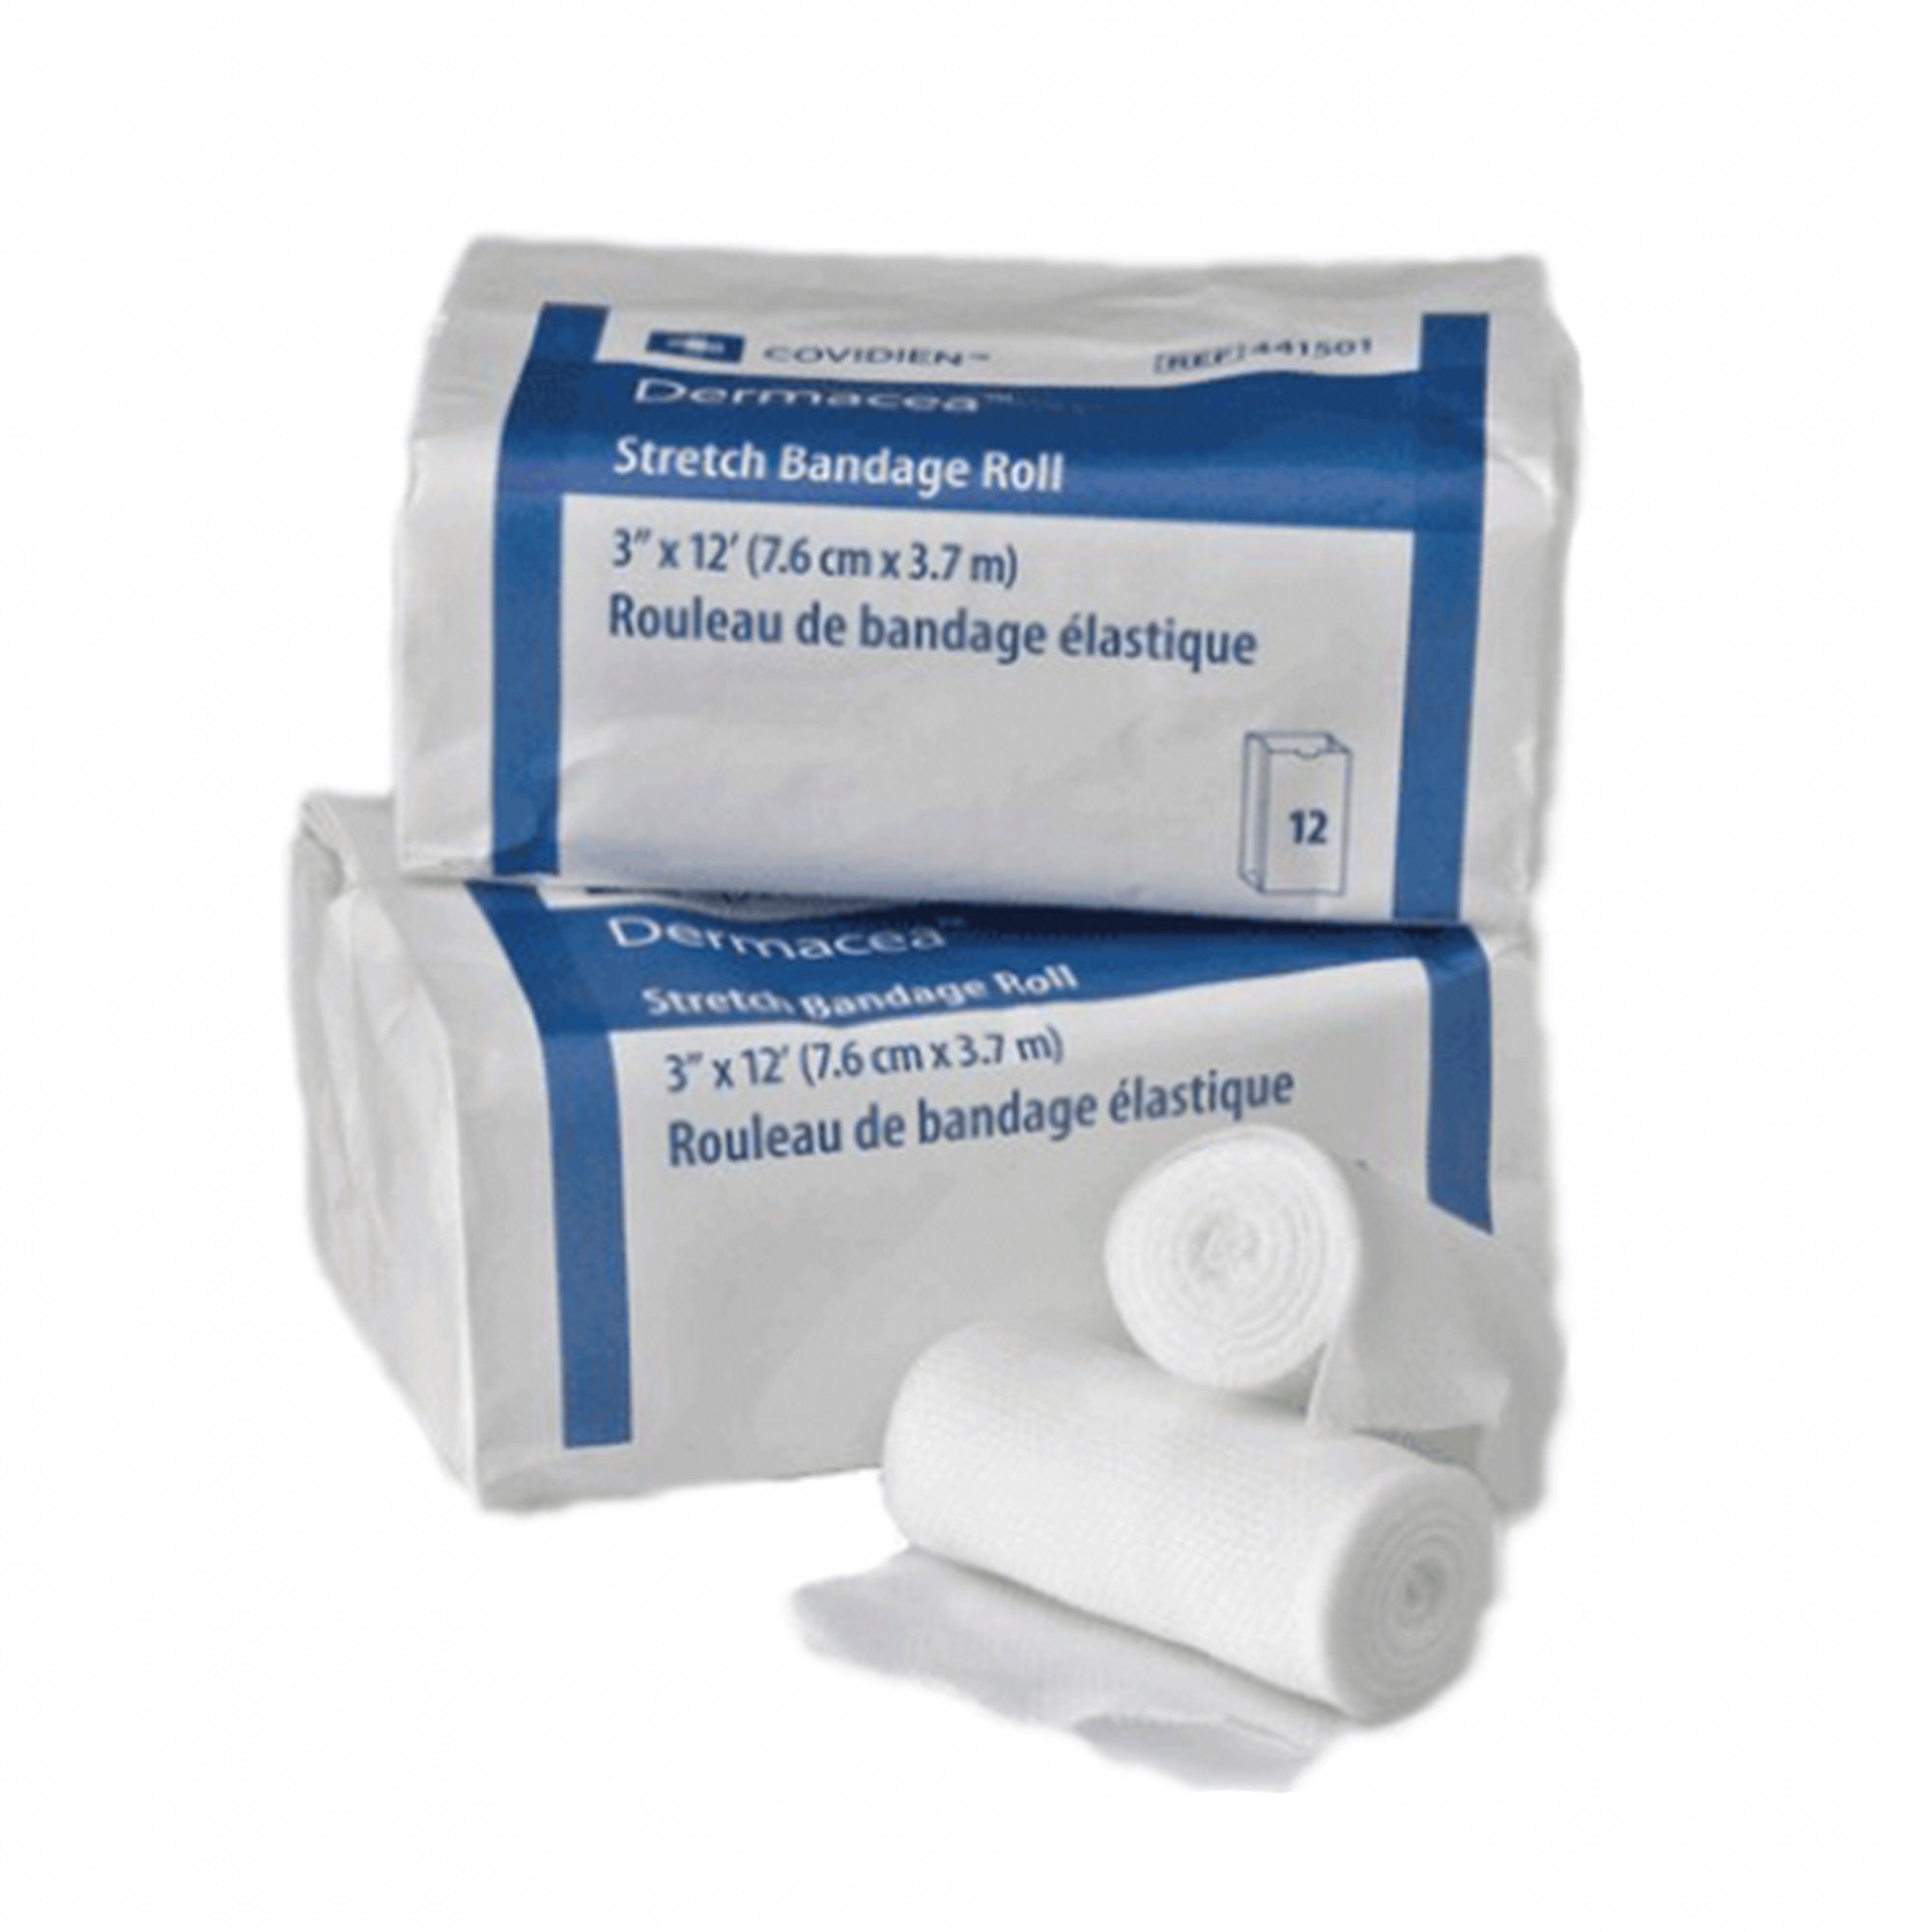 Dermacea™ Conforming Bandage Cotton / Polyester 3 Inch x 4 Yard Roll